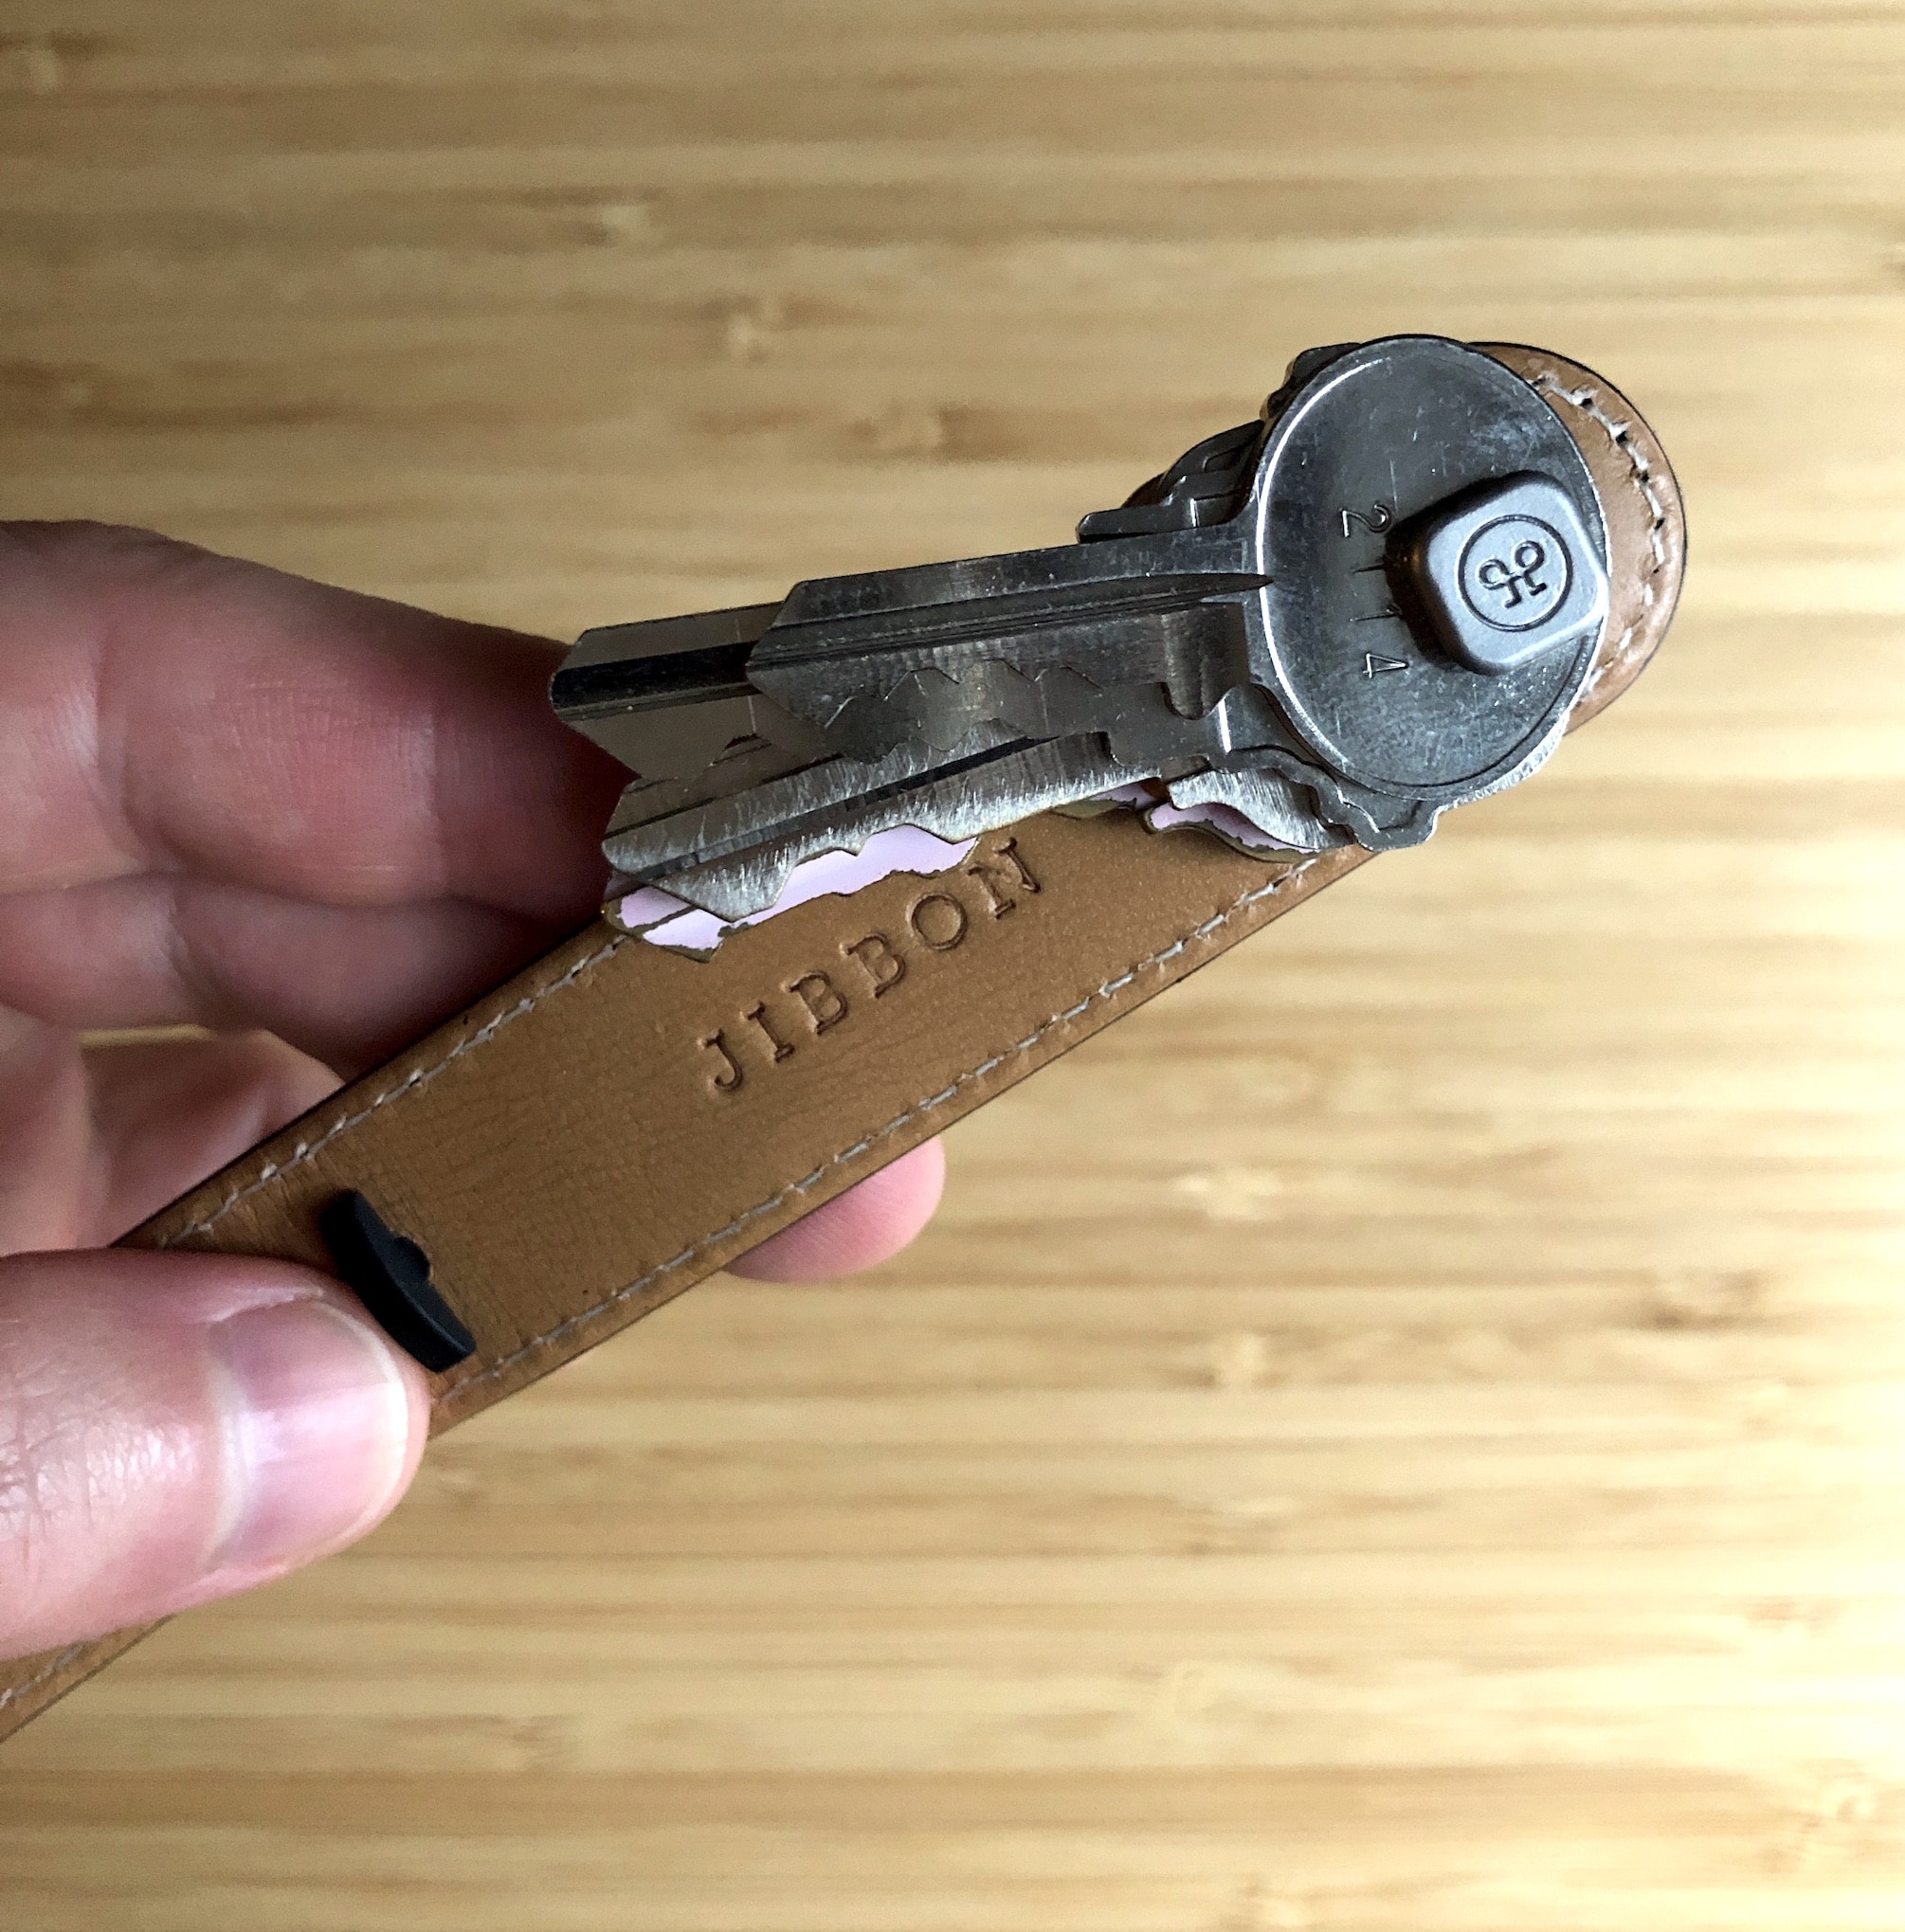 Short demonstration on how to open the key ring on the key pouch